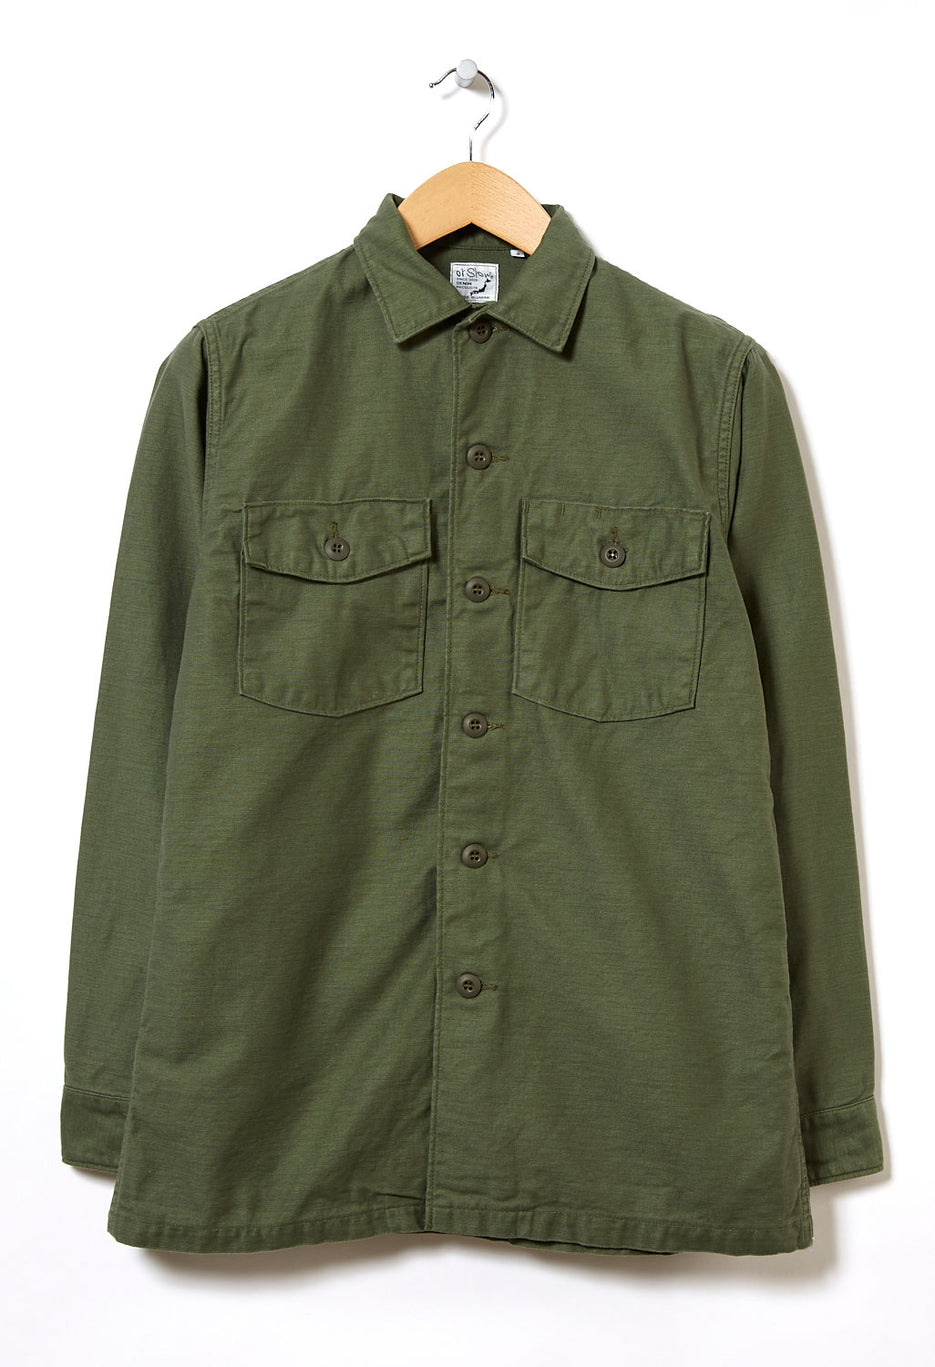 orSlow Men's US Army Shirt 1